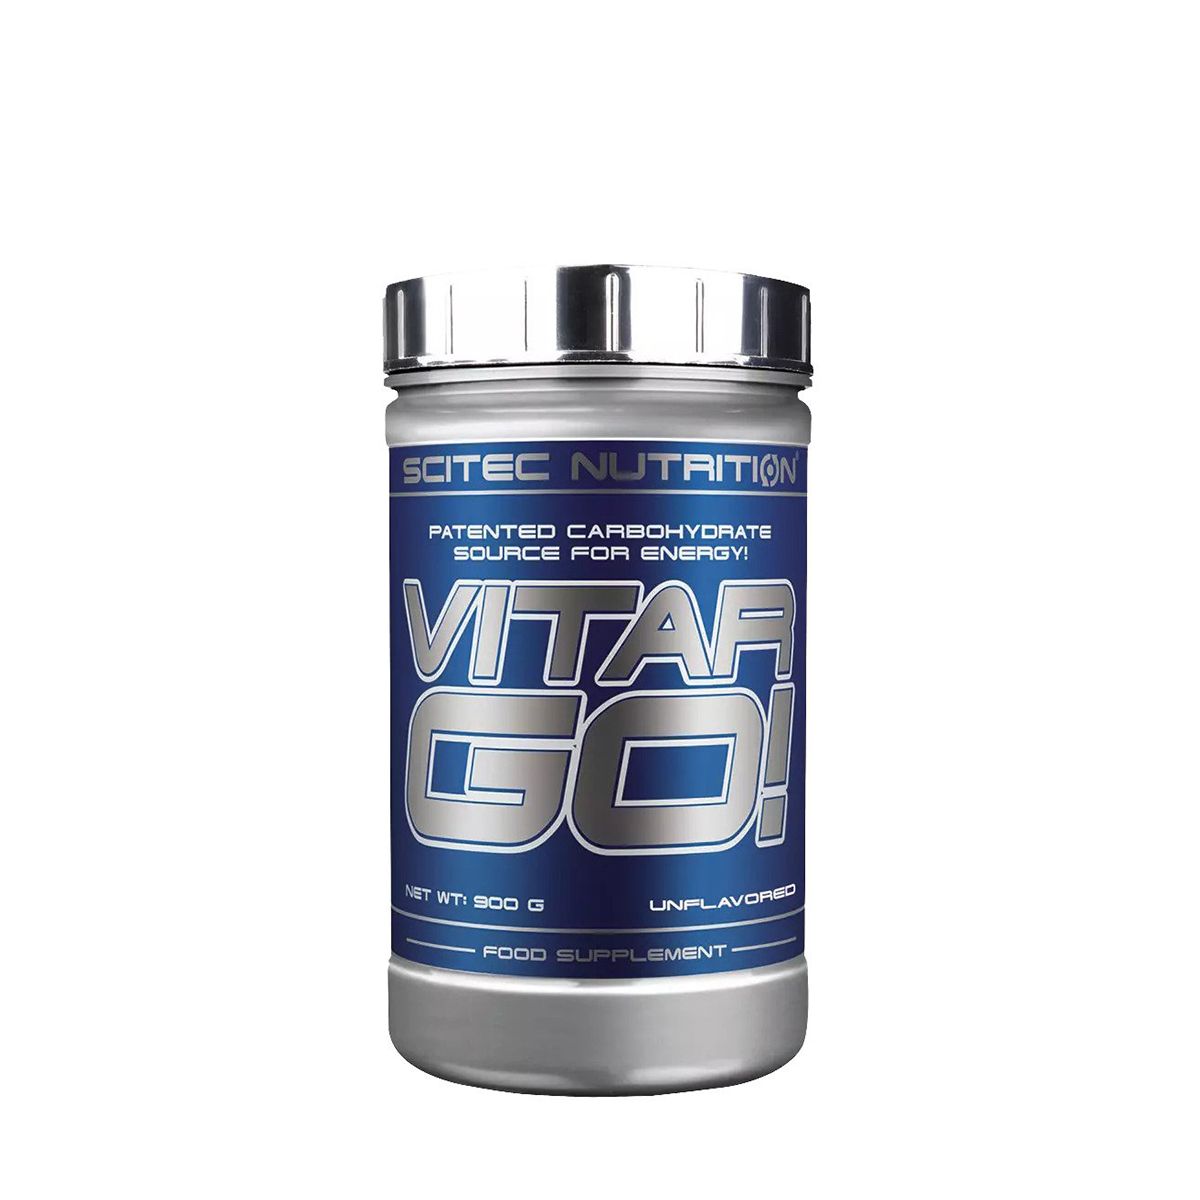 SCITEC NUTRITION - VITARGO! - PATENTED CARBOHYDRATE SOURCE FOR ENERGY - 900 G